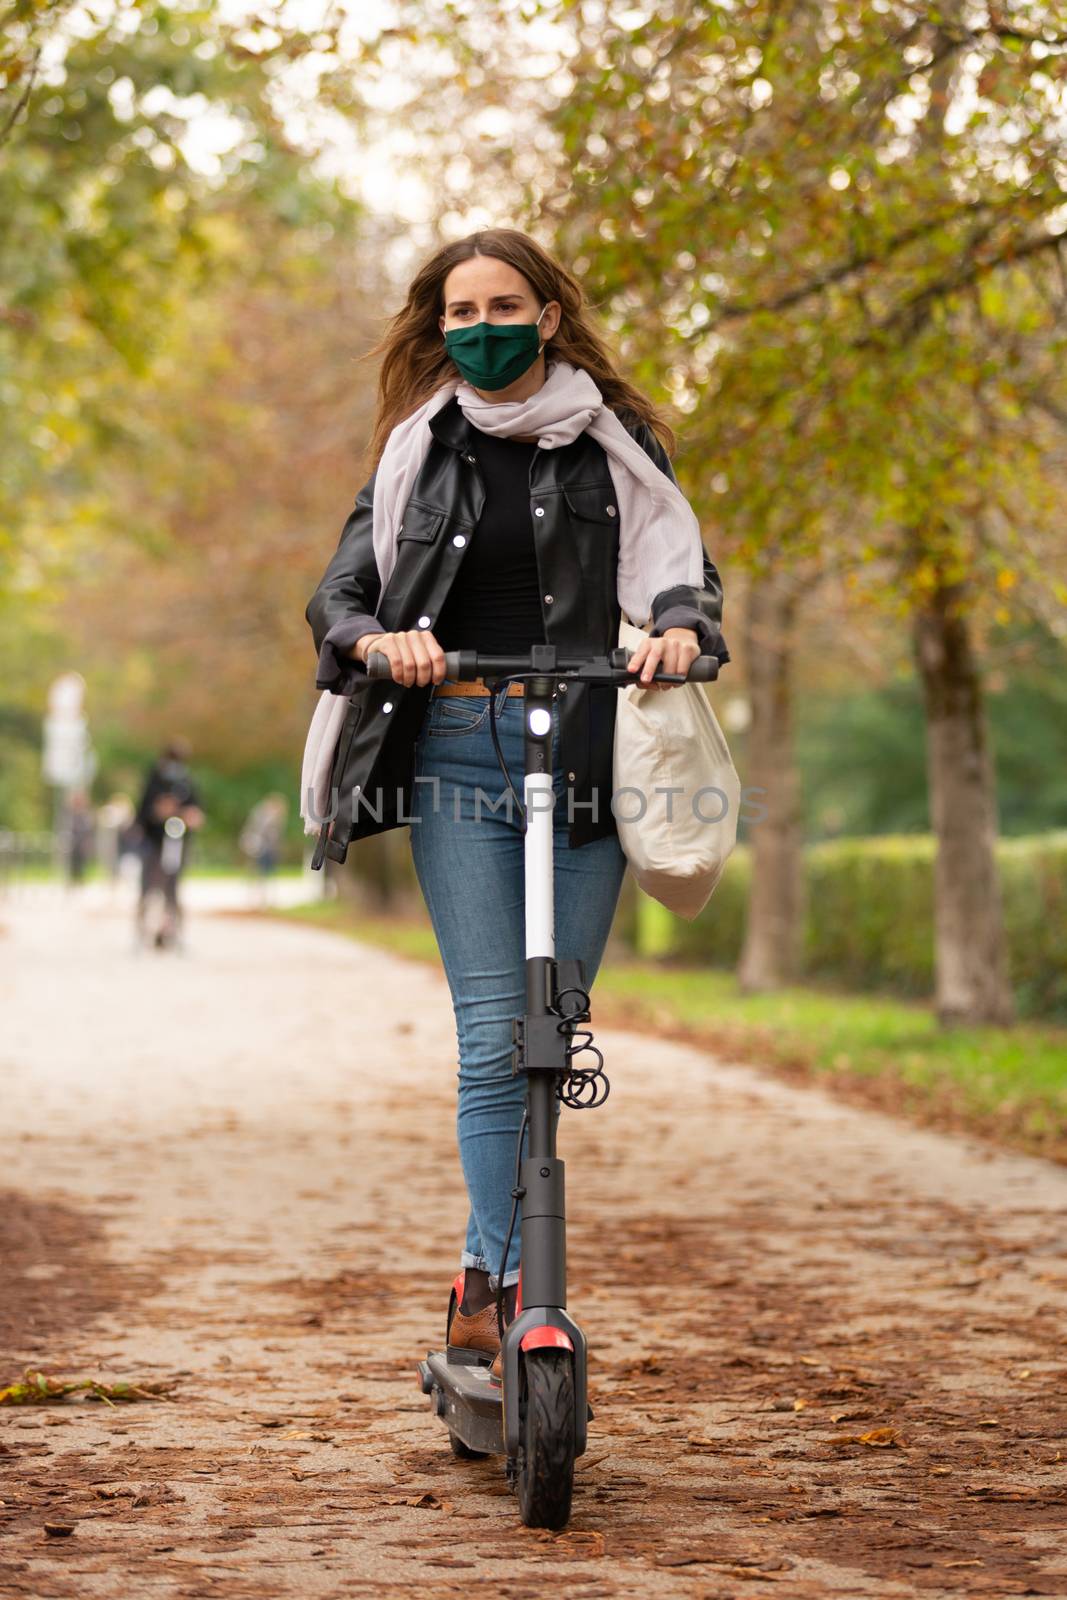 Casual caucasian teenager wearing protective face mask riding urban electric scooter in city park during covid pandemic. Urban mobility concept by kasto